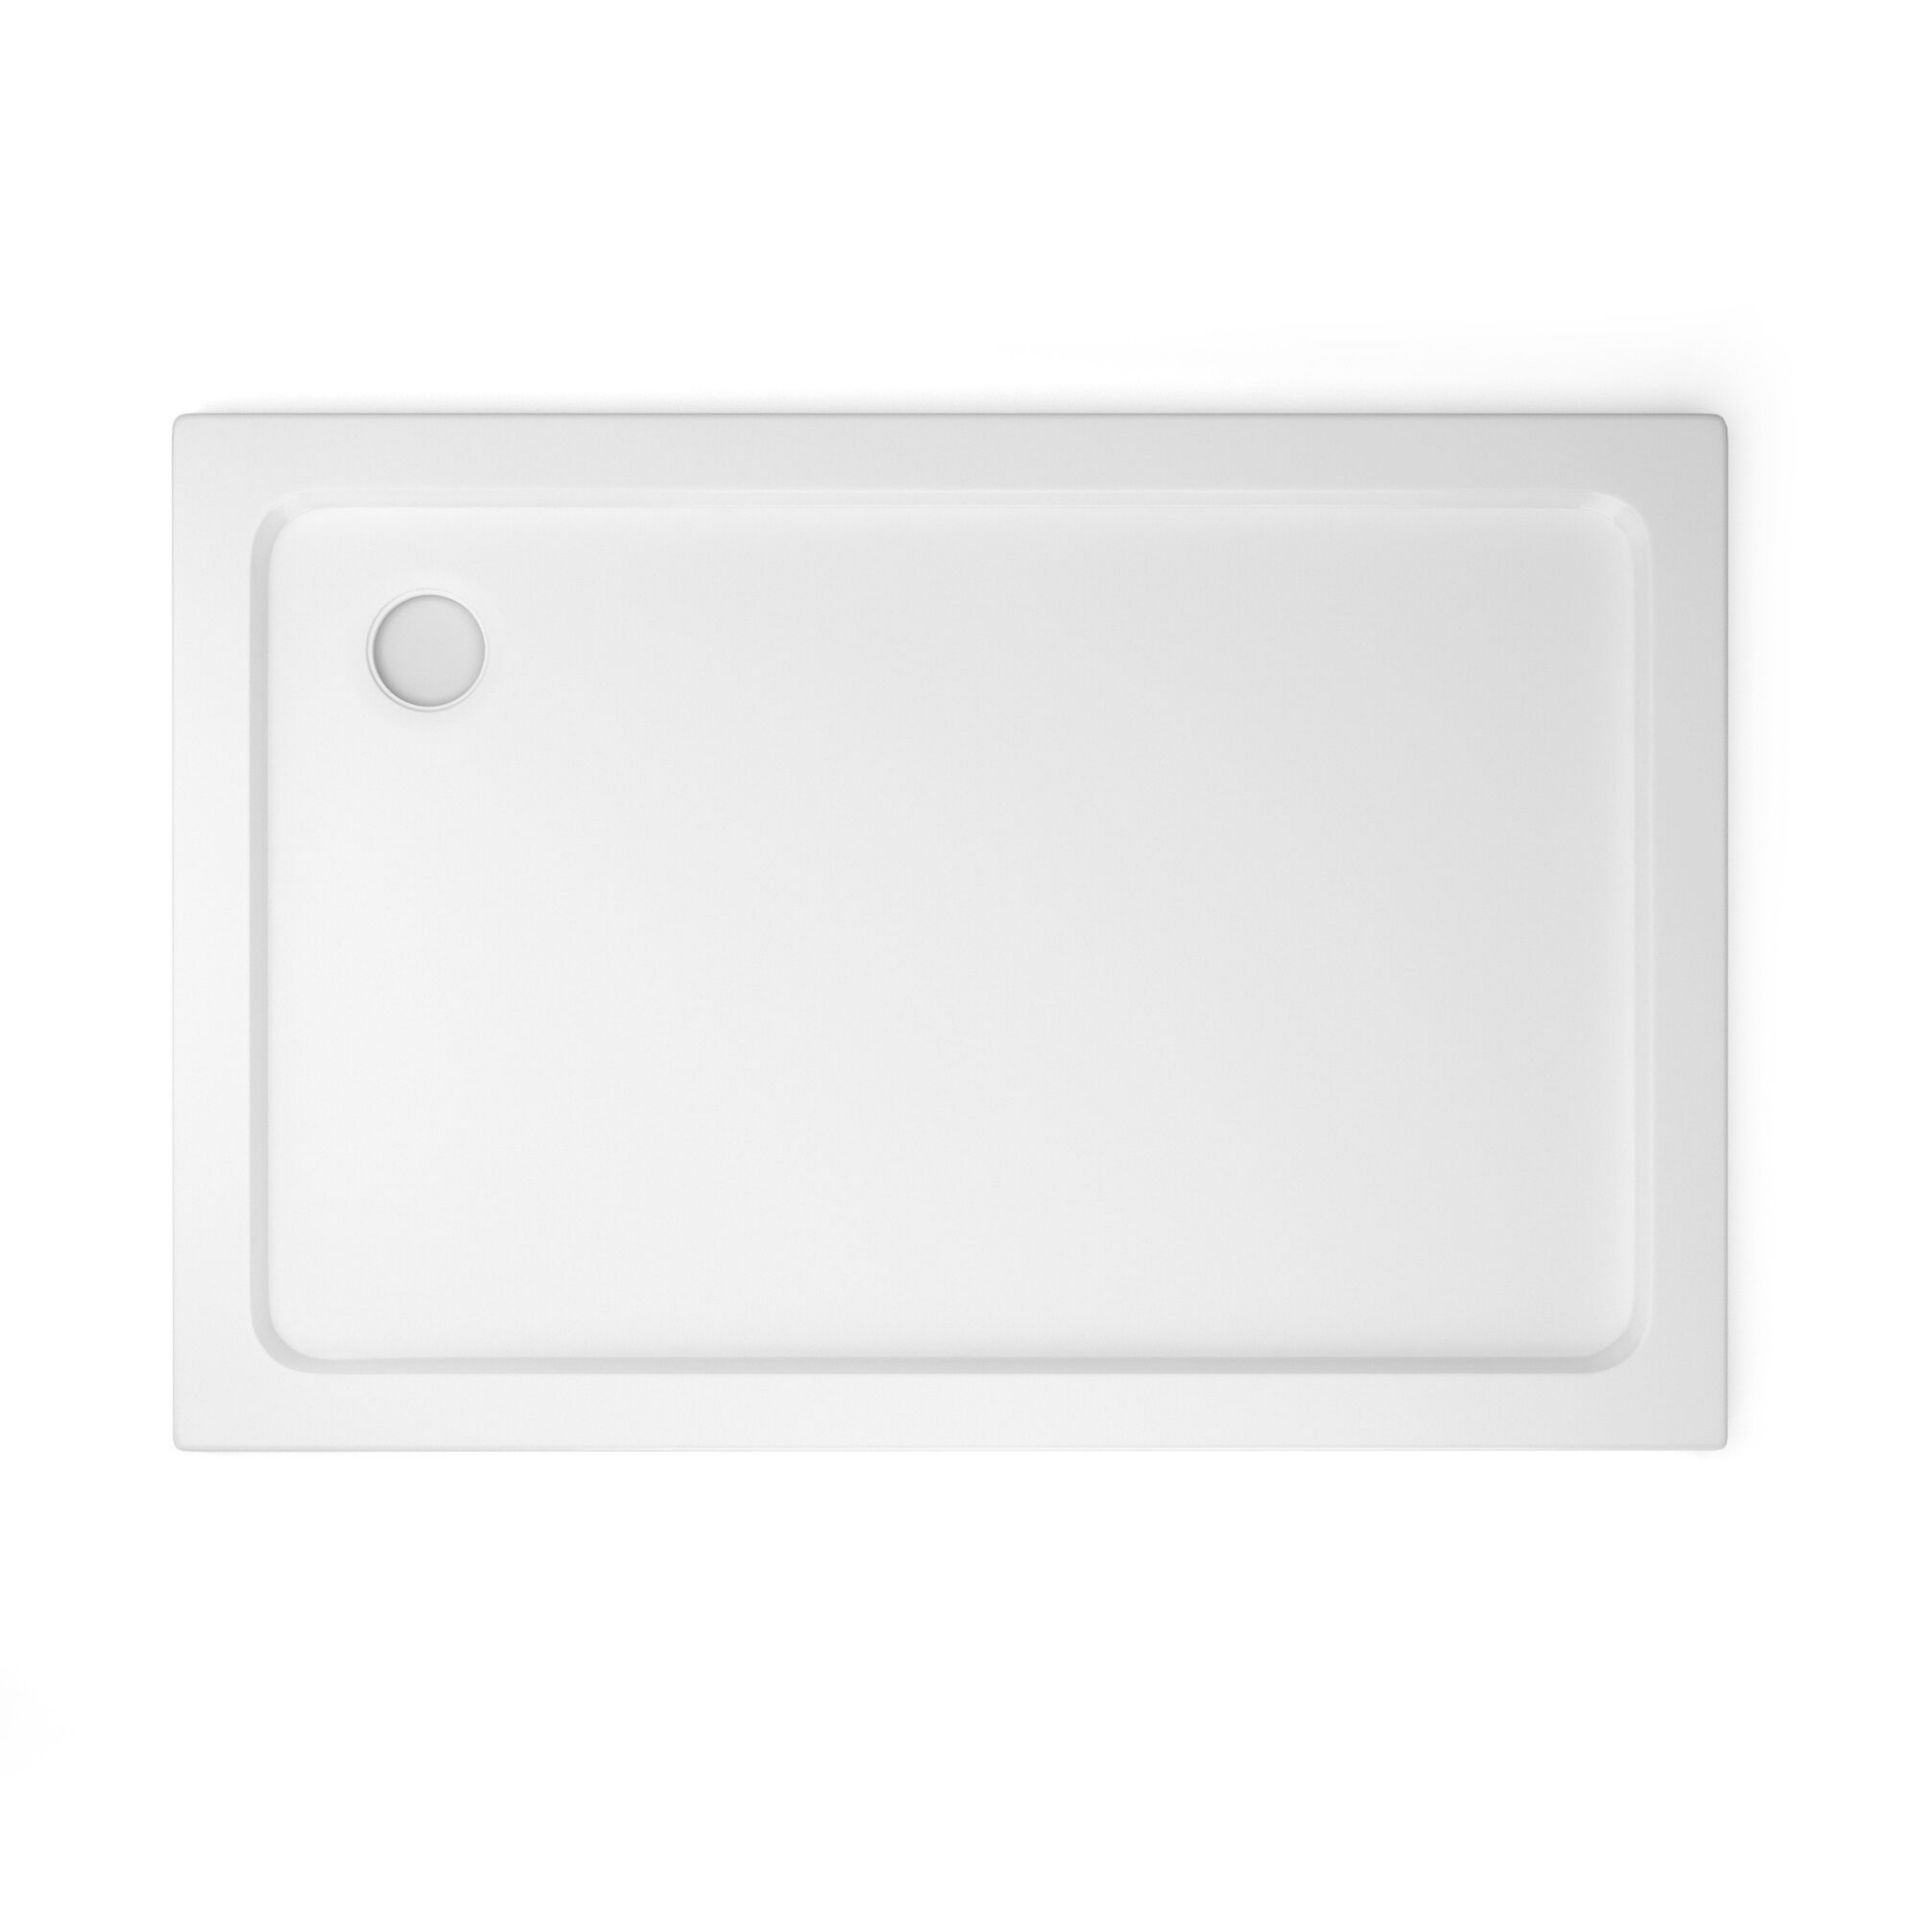 (DW212) 1200x800mm Rectangular Ultra Slim Shower Tray. Constructed from acrylic capped stone r...